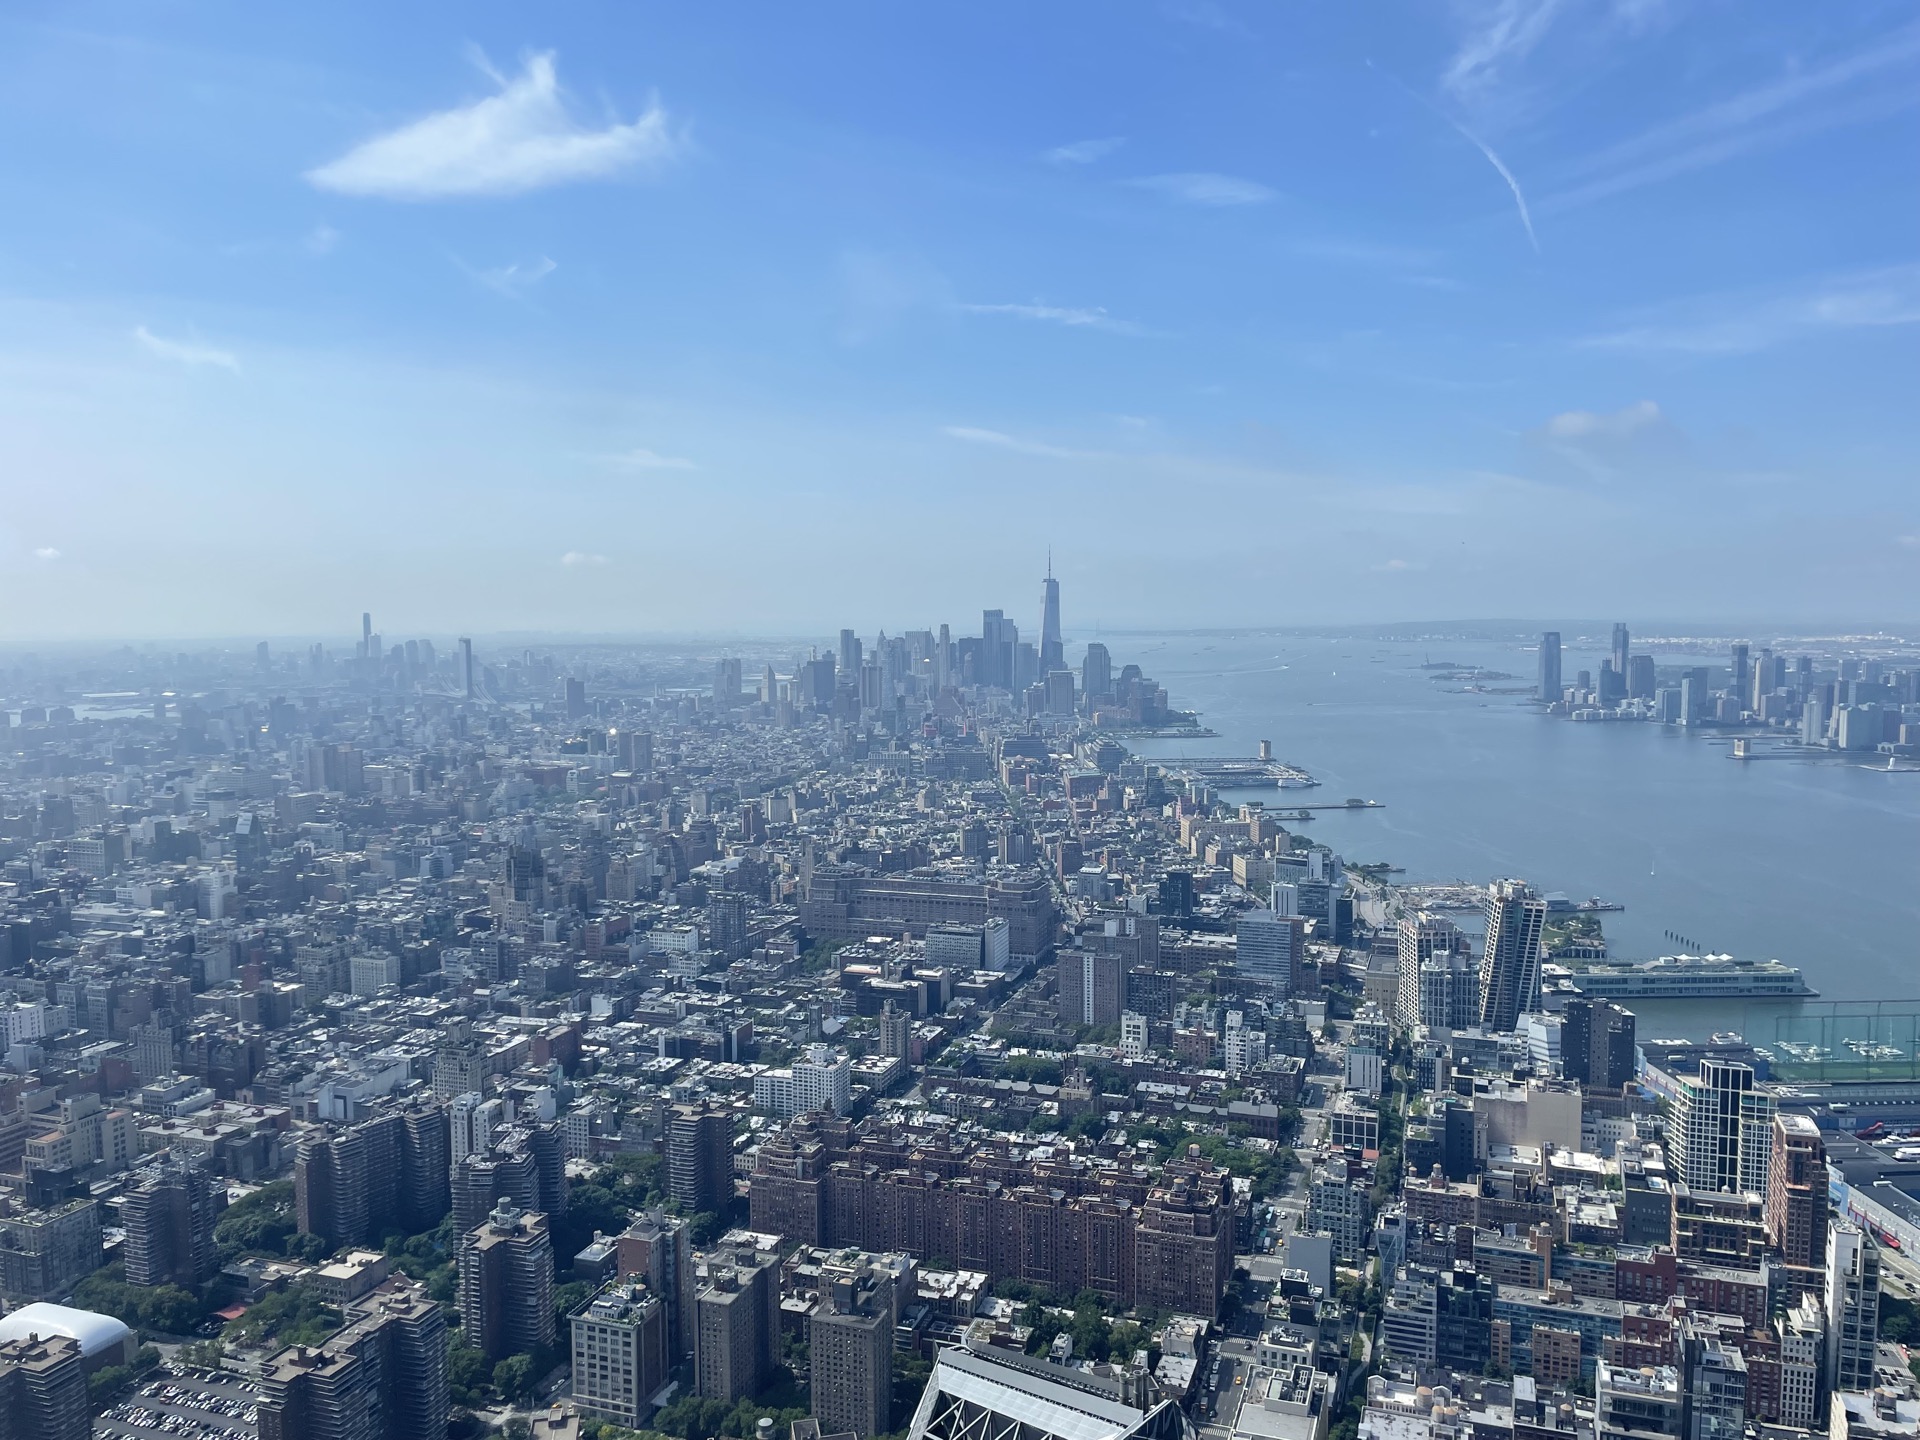 A view of downtown New York from Edge